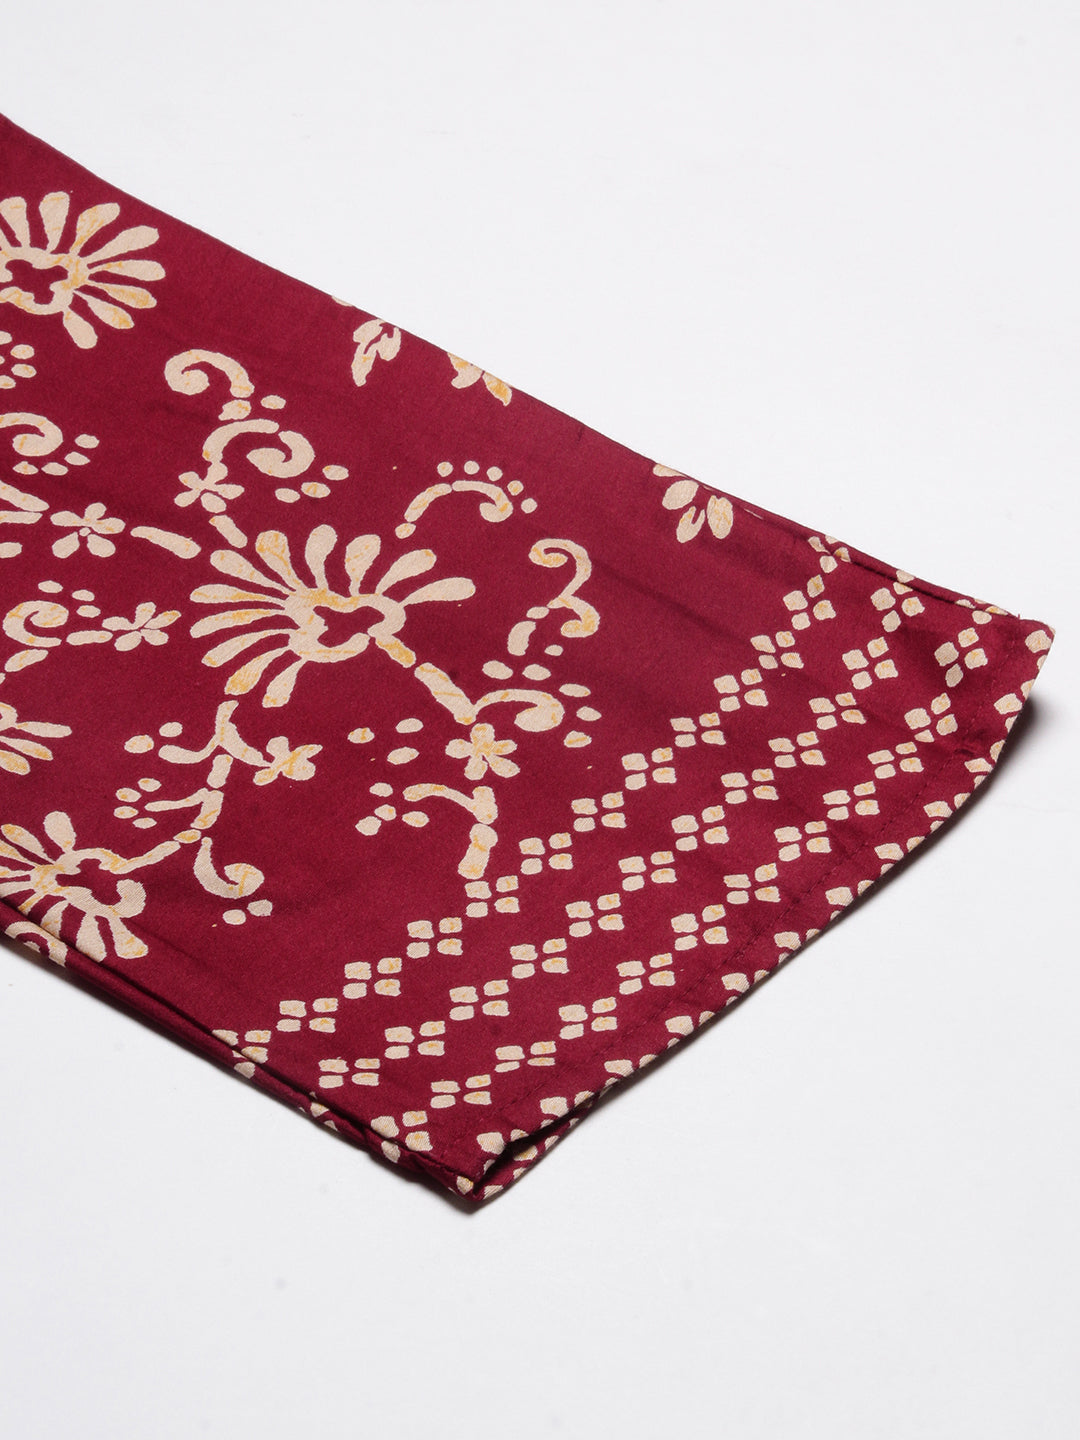 Floral Printed Mirror Embroidered Kurta With Floral Pants - Maroon